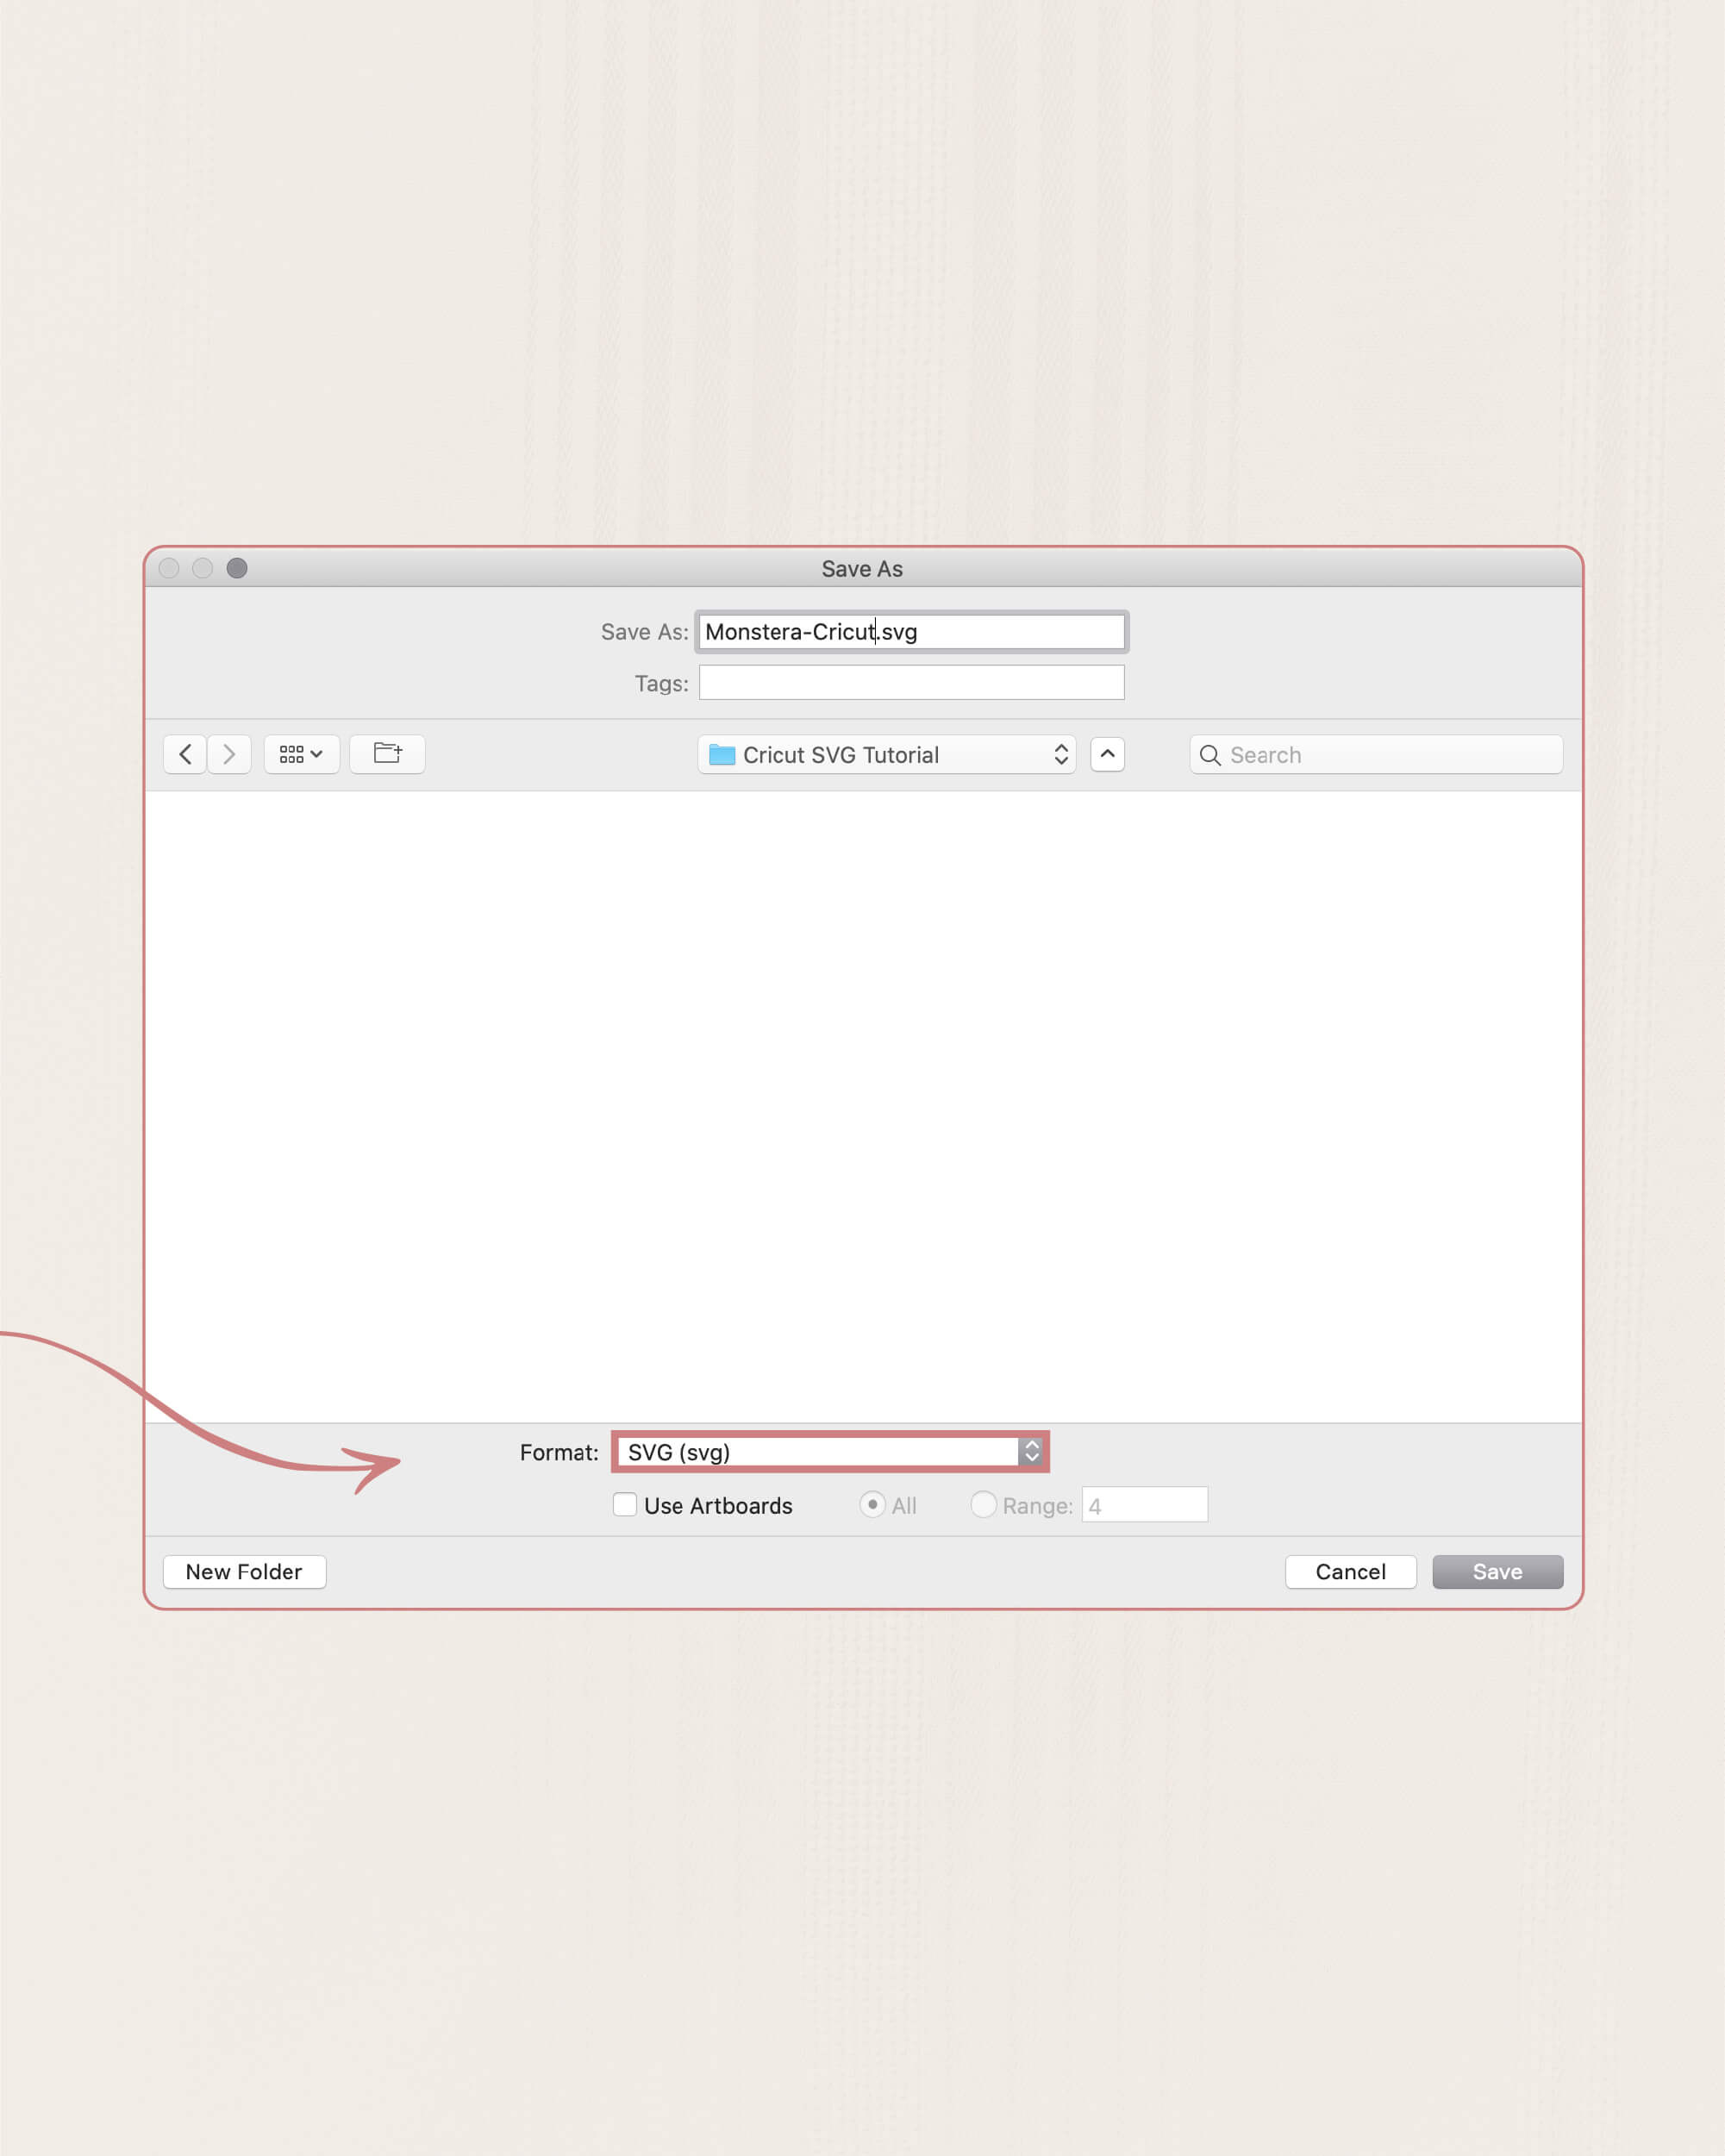 How to save Adobe Illustrator document as an SVG